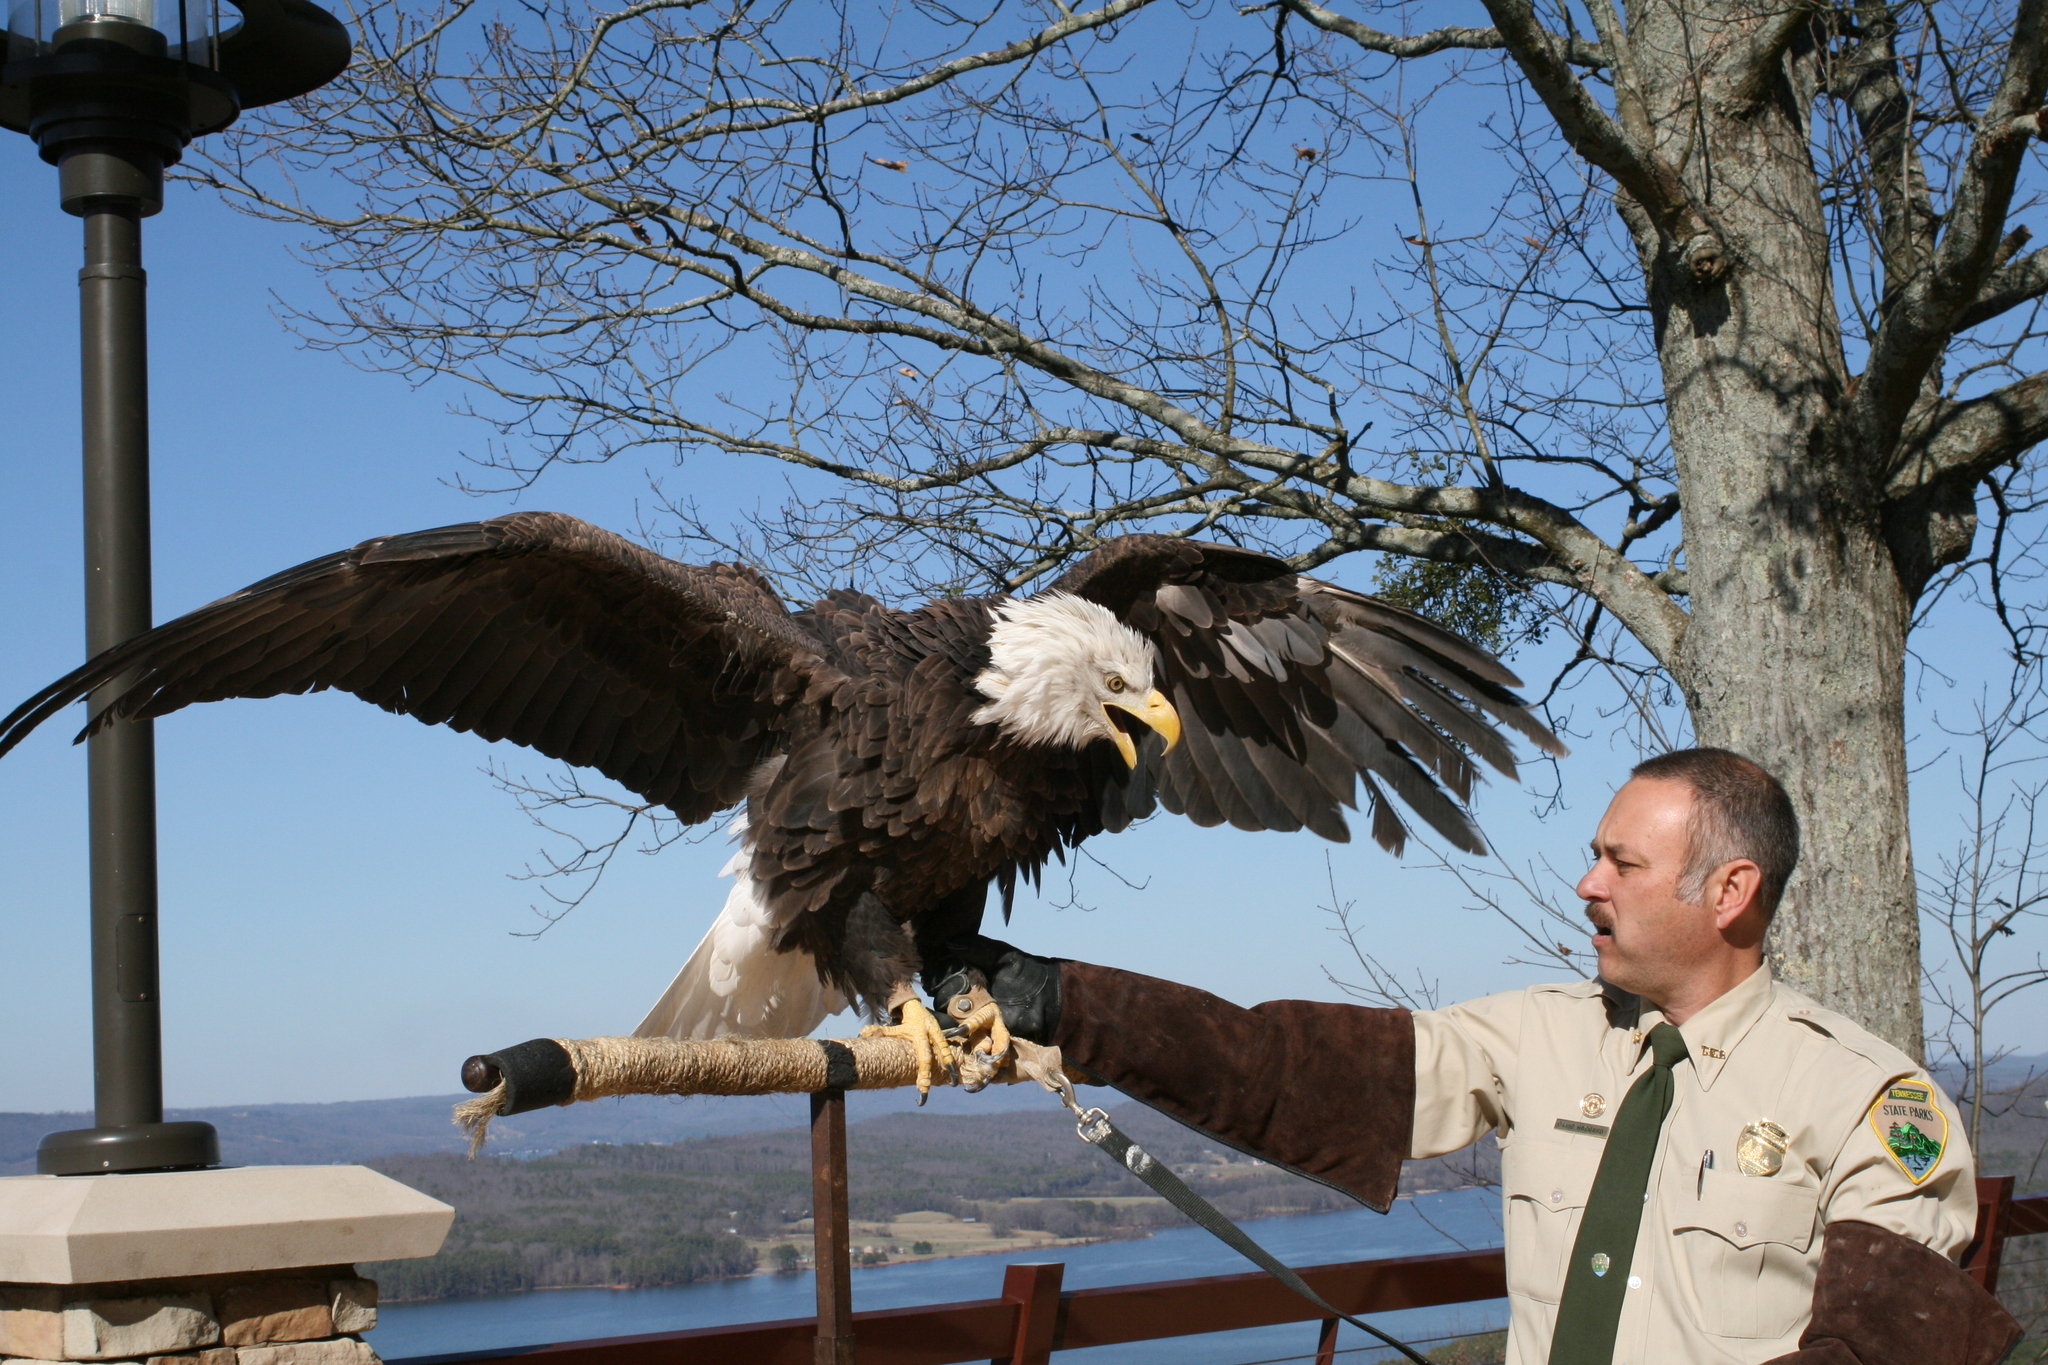 Get up close and personal with a Bald Eagle—tickets available now for Eagle Awareness Weekend